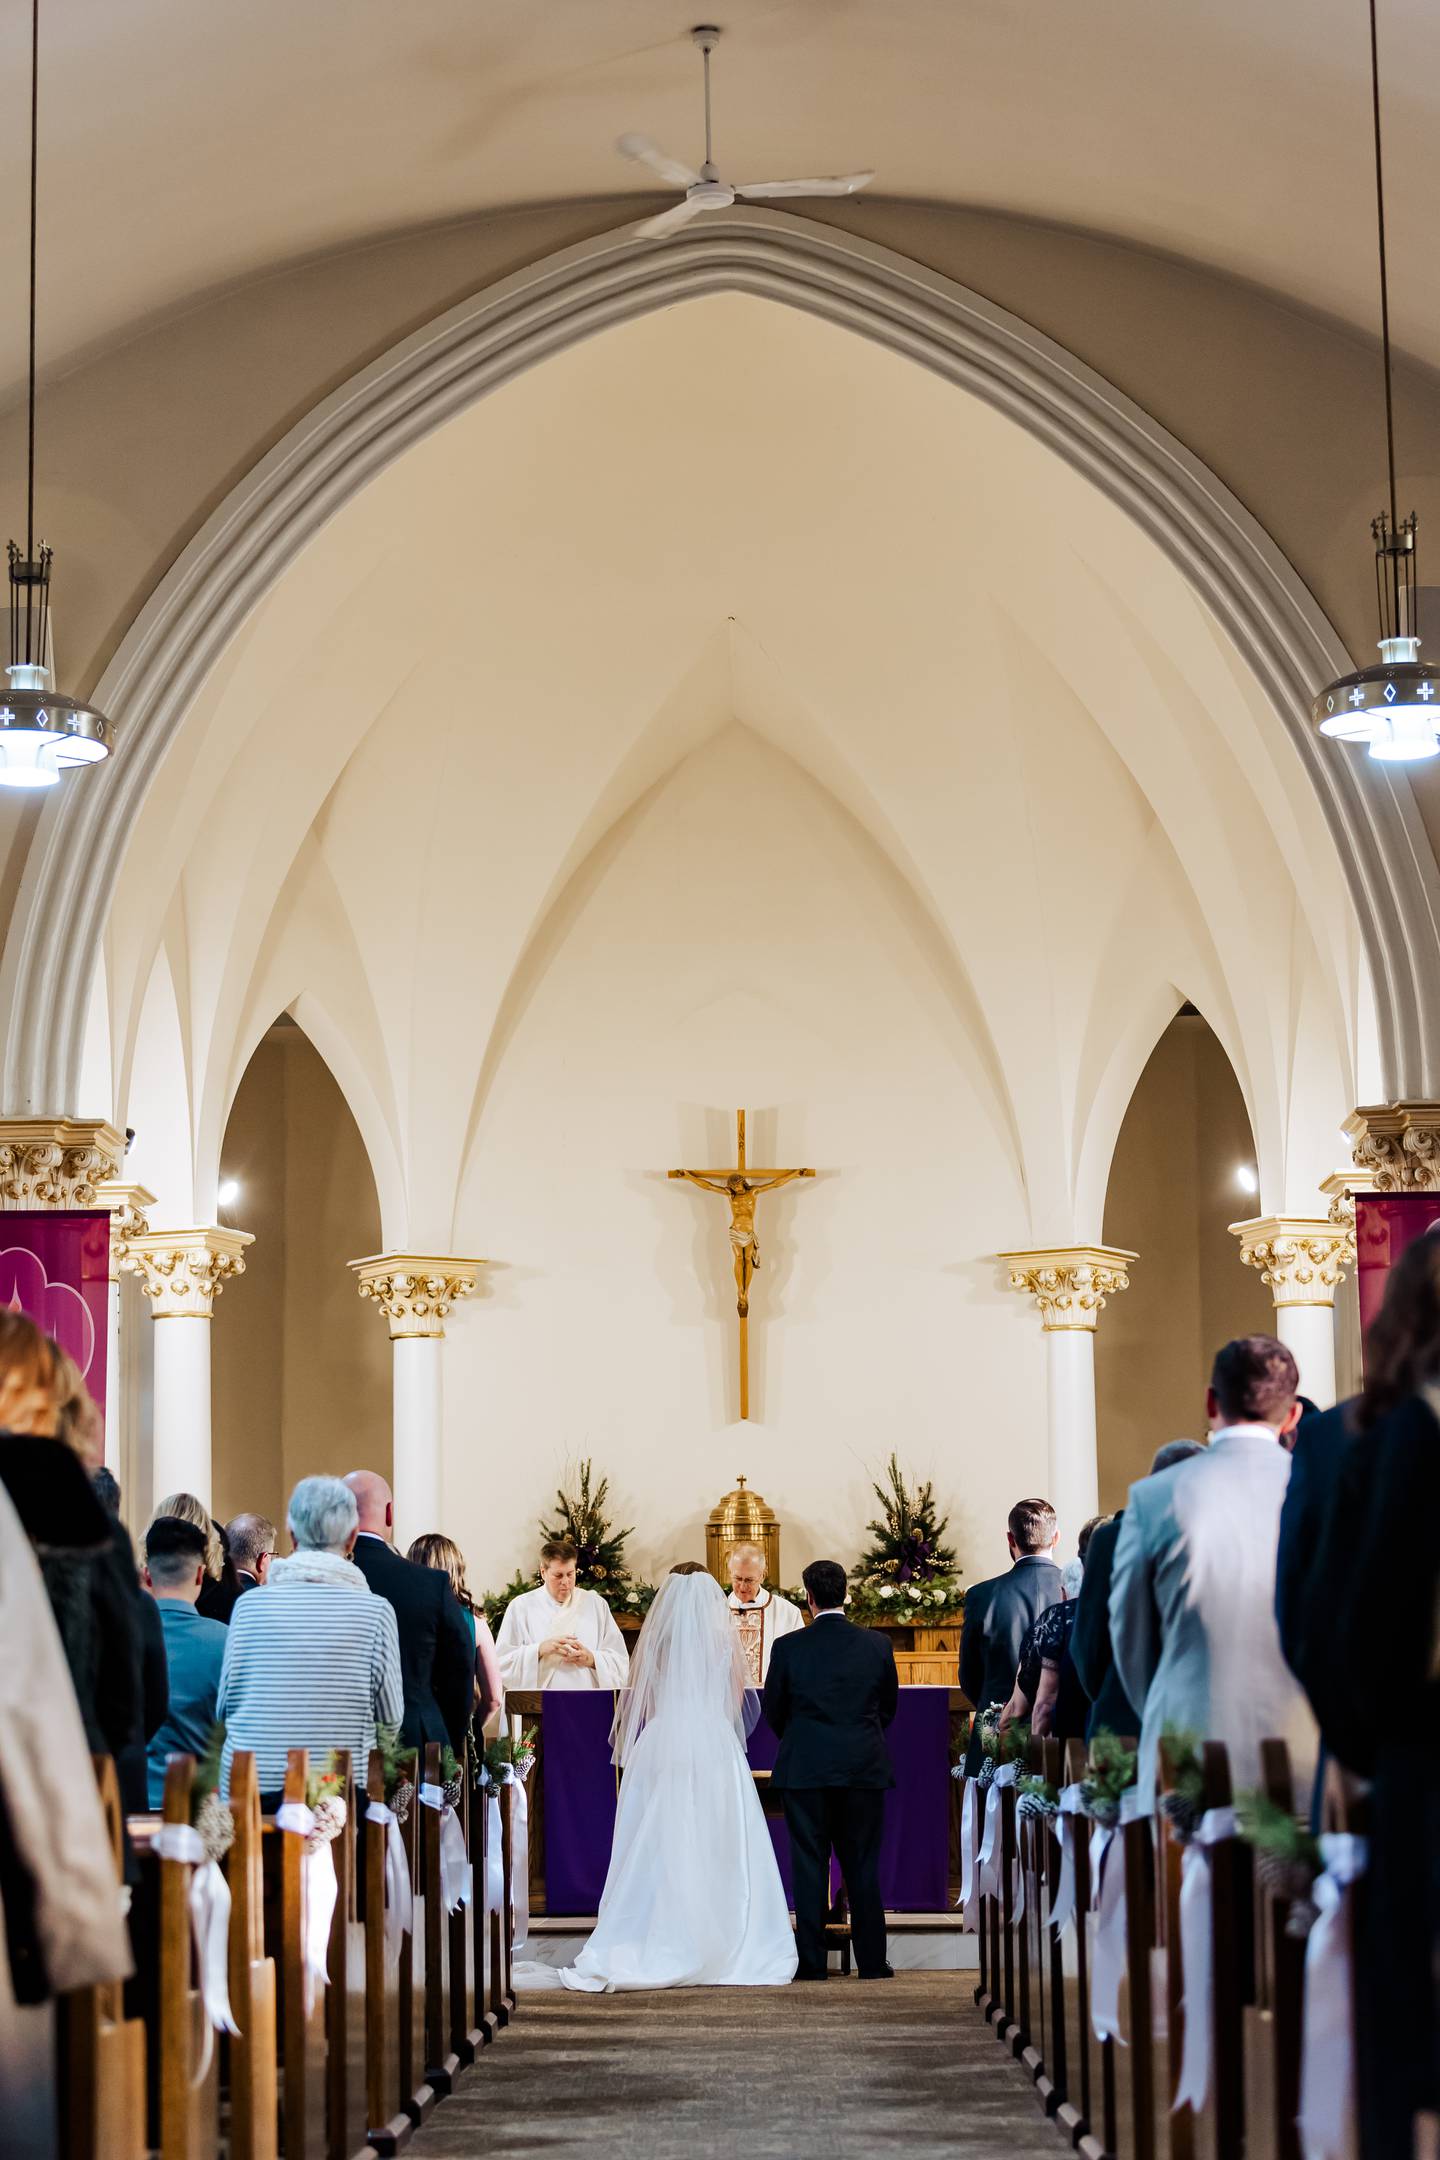 Lockport native Abigail Rodewald Brown was the fifth generation of women in her family to get married at St. Joseph Catholic Church in Lockport. She is pictured at the church’s altar with her husband William Brown on their wedding day, Saturday, Dec. 2, 2022.